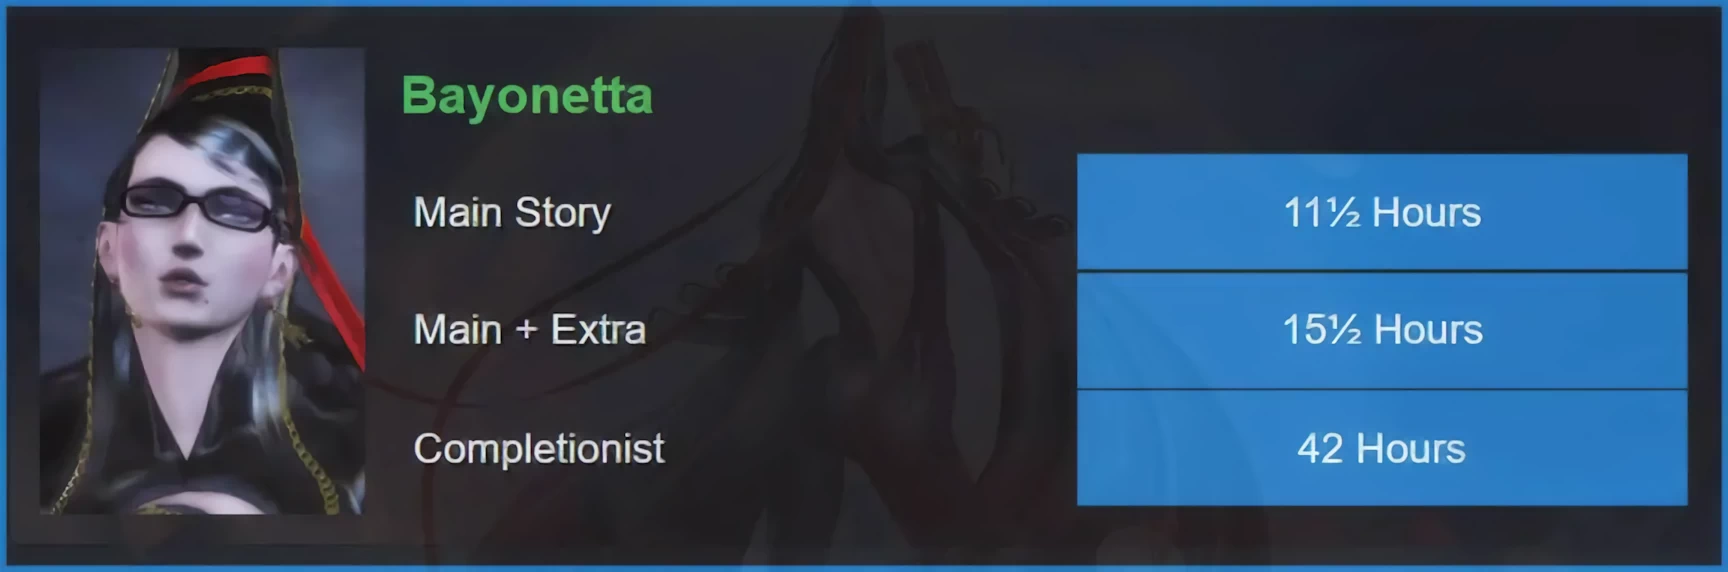 bayonetta image and playtime information